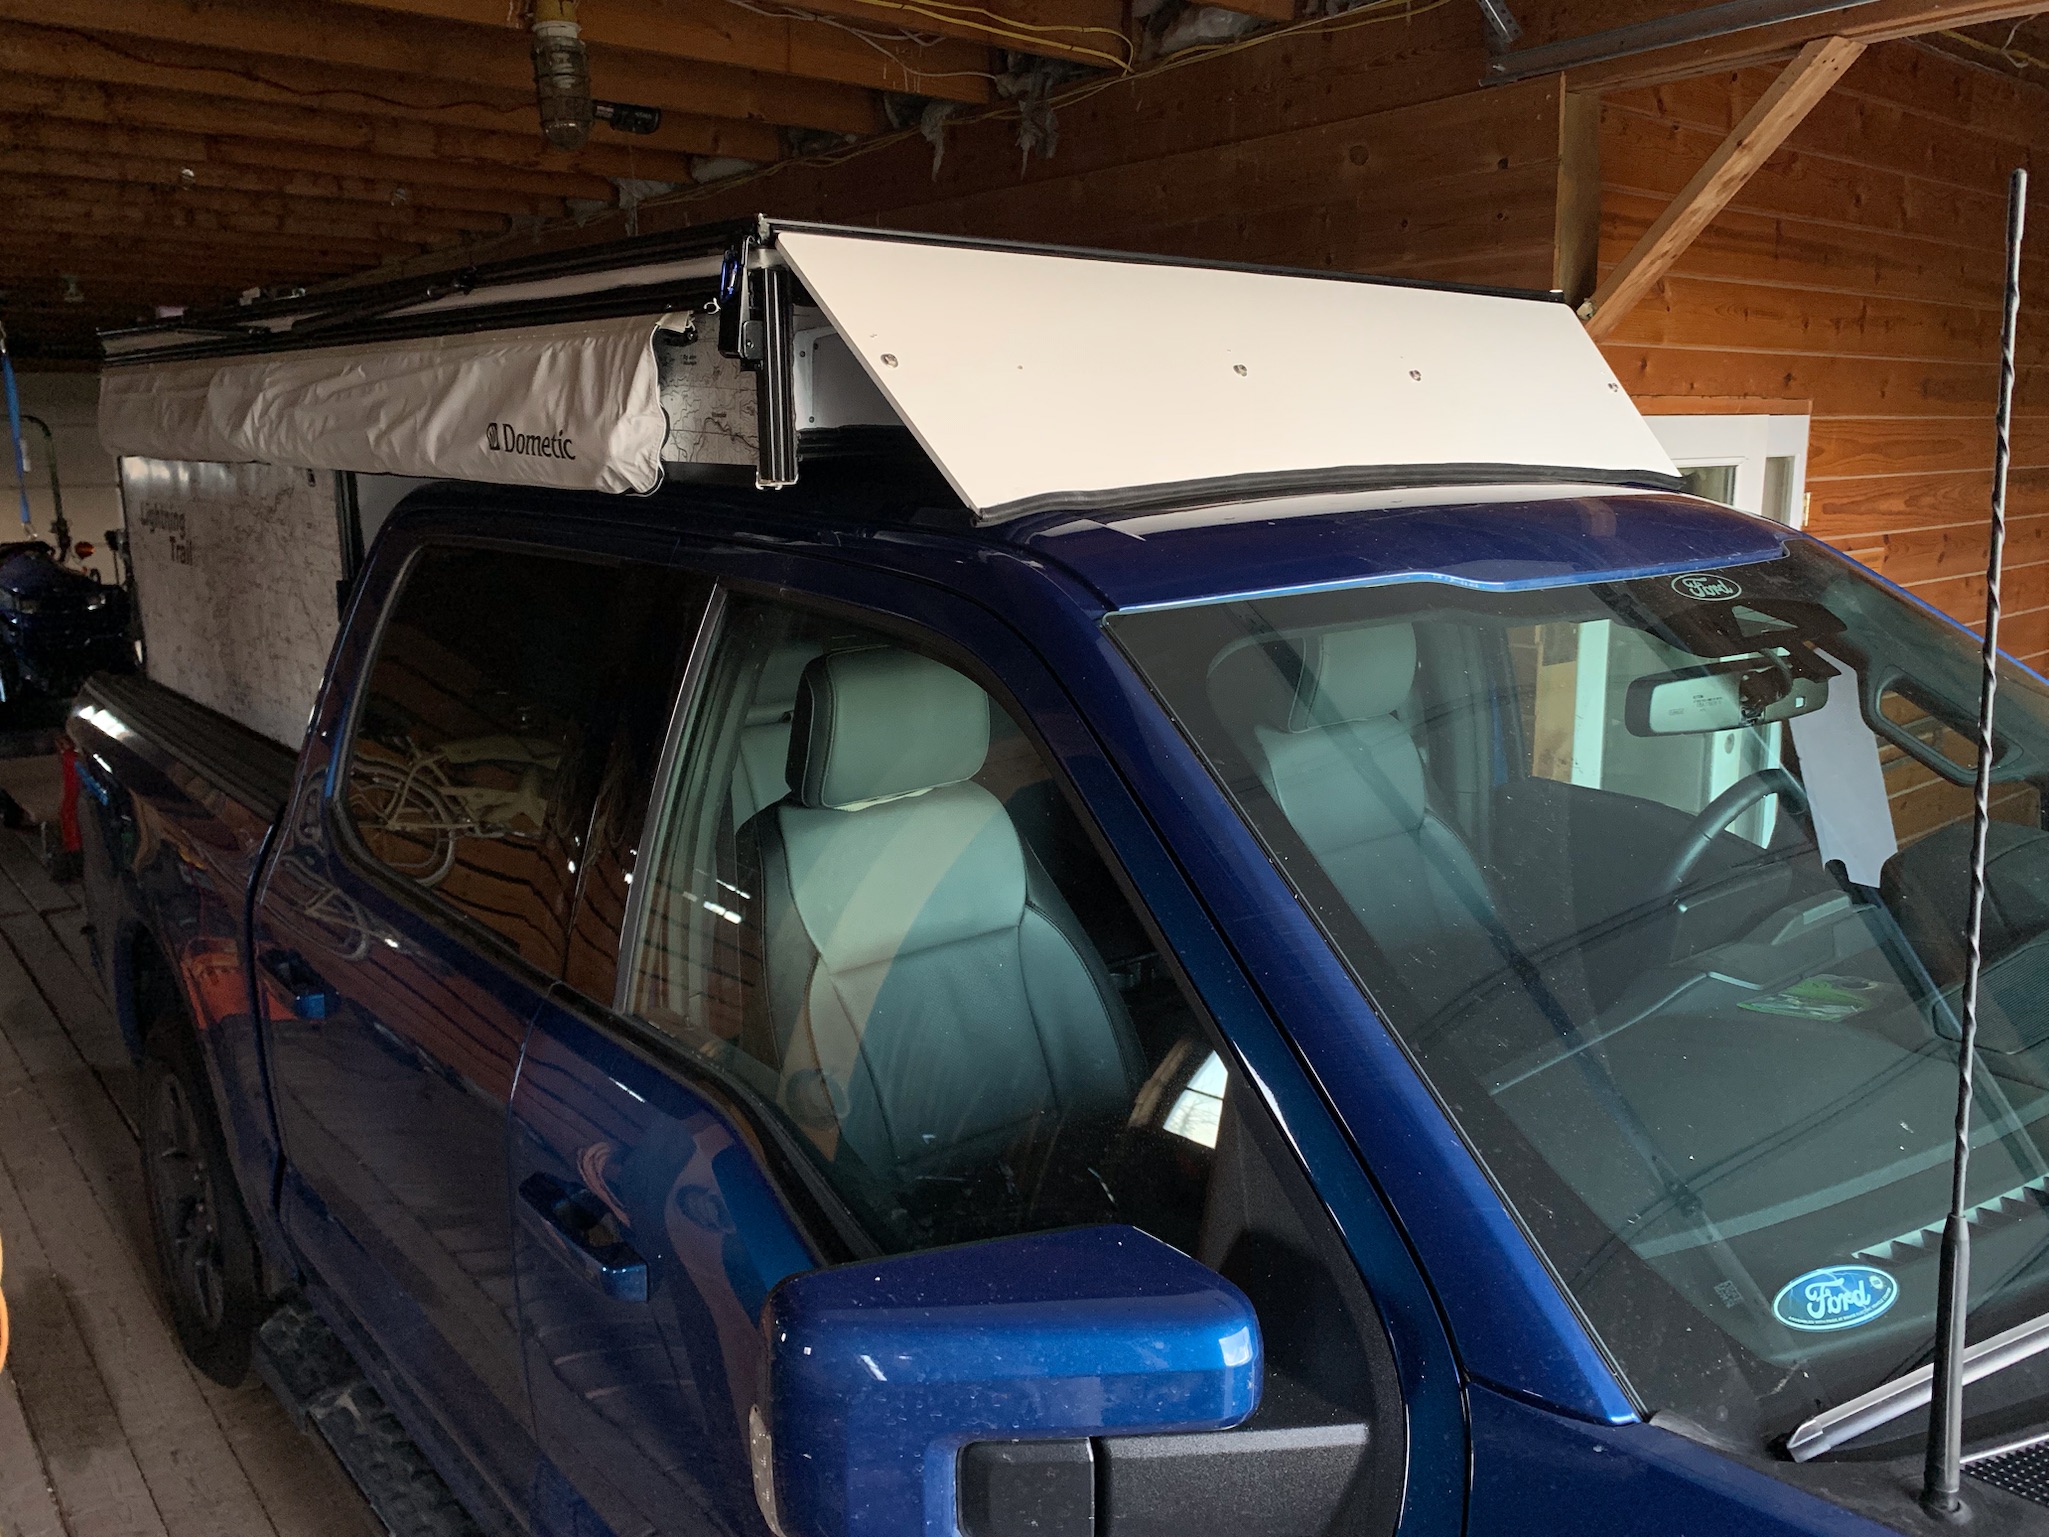 Ford F-150 Lightning The tiny, all-electric, slide-in camper I built for my F150 Lightning doesn’t have a shower, but I’m working on it... 016128cfc7b6d96038c739642b4eaa845f48e33979